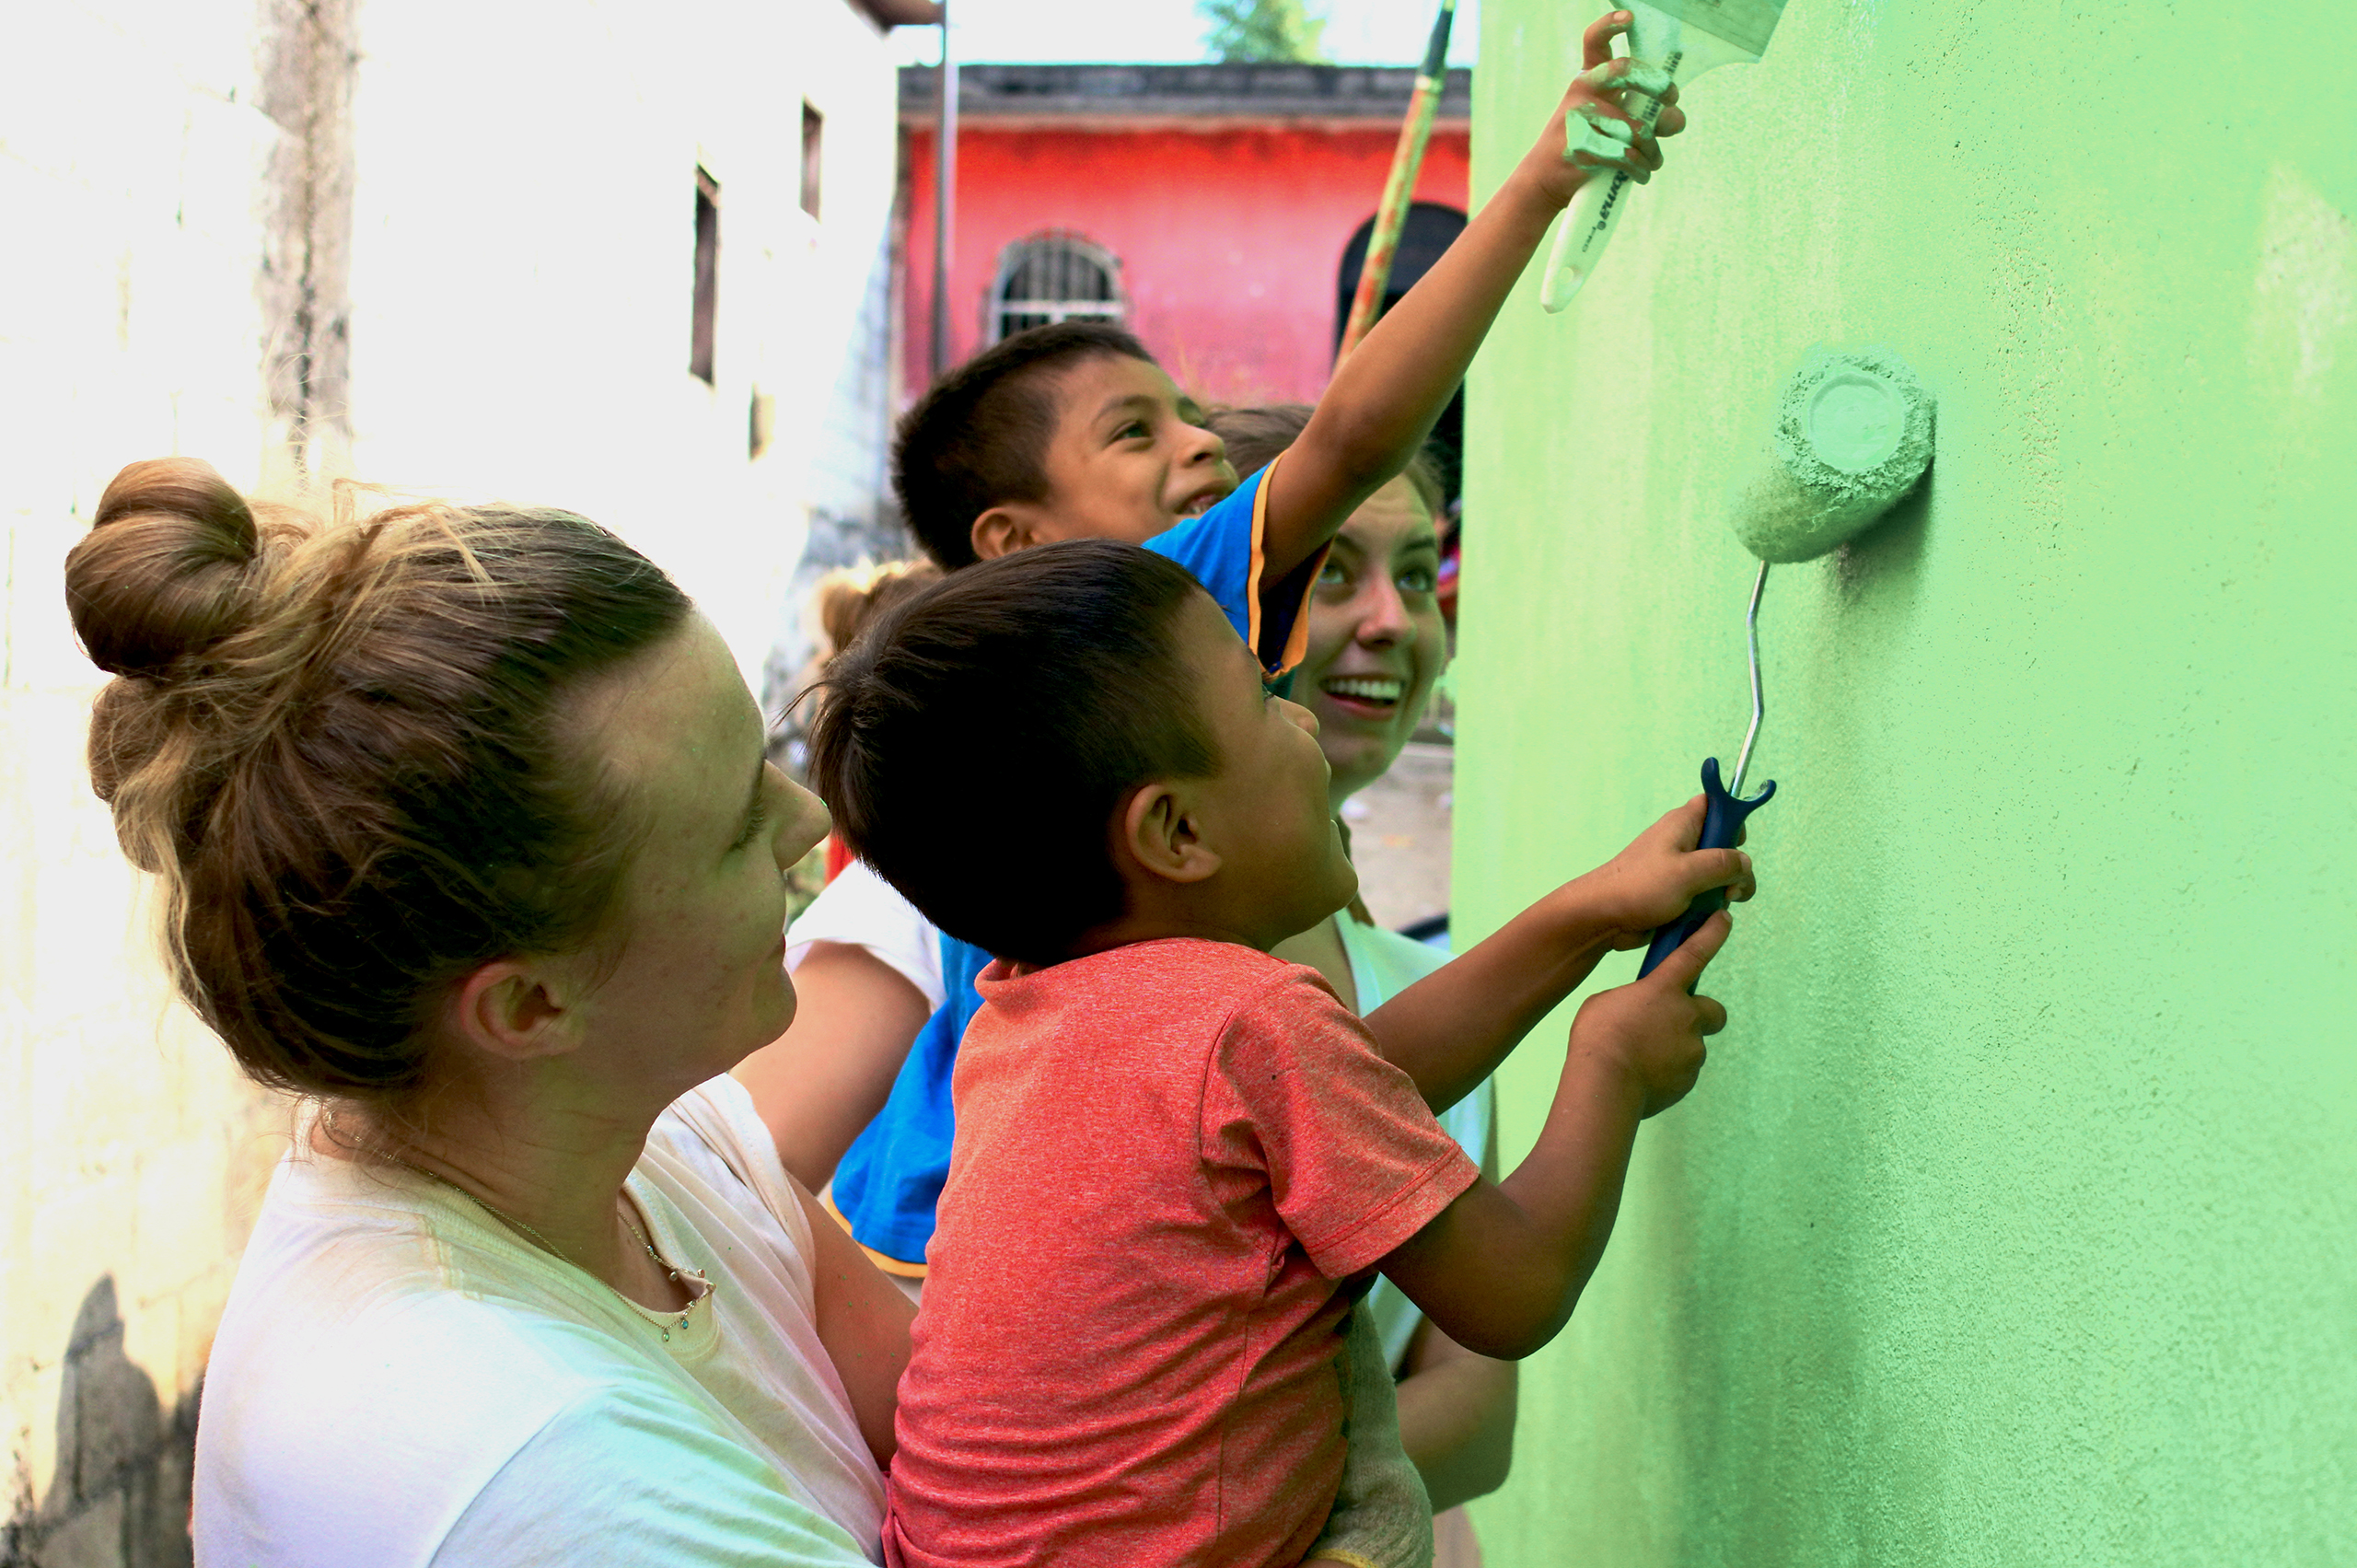 SJC student paints a wall in a Guatemalan home